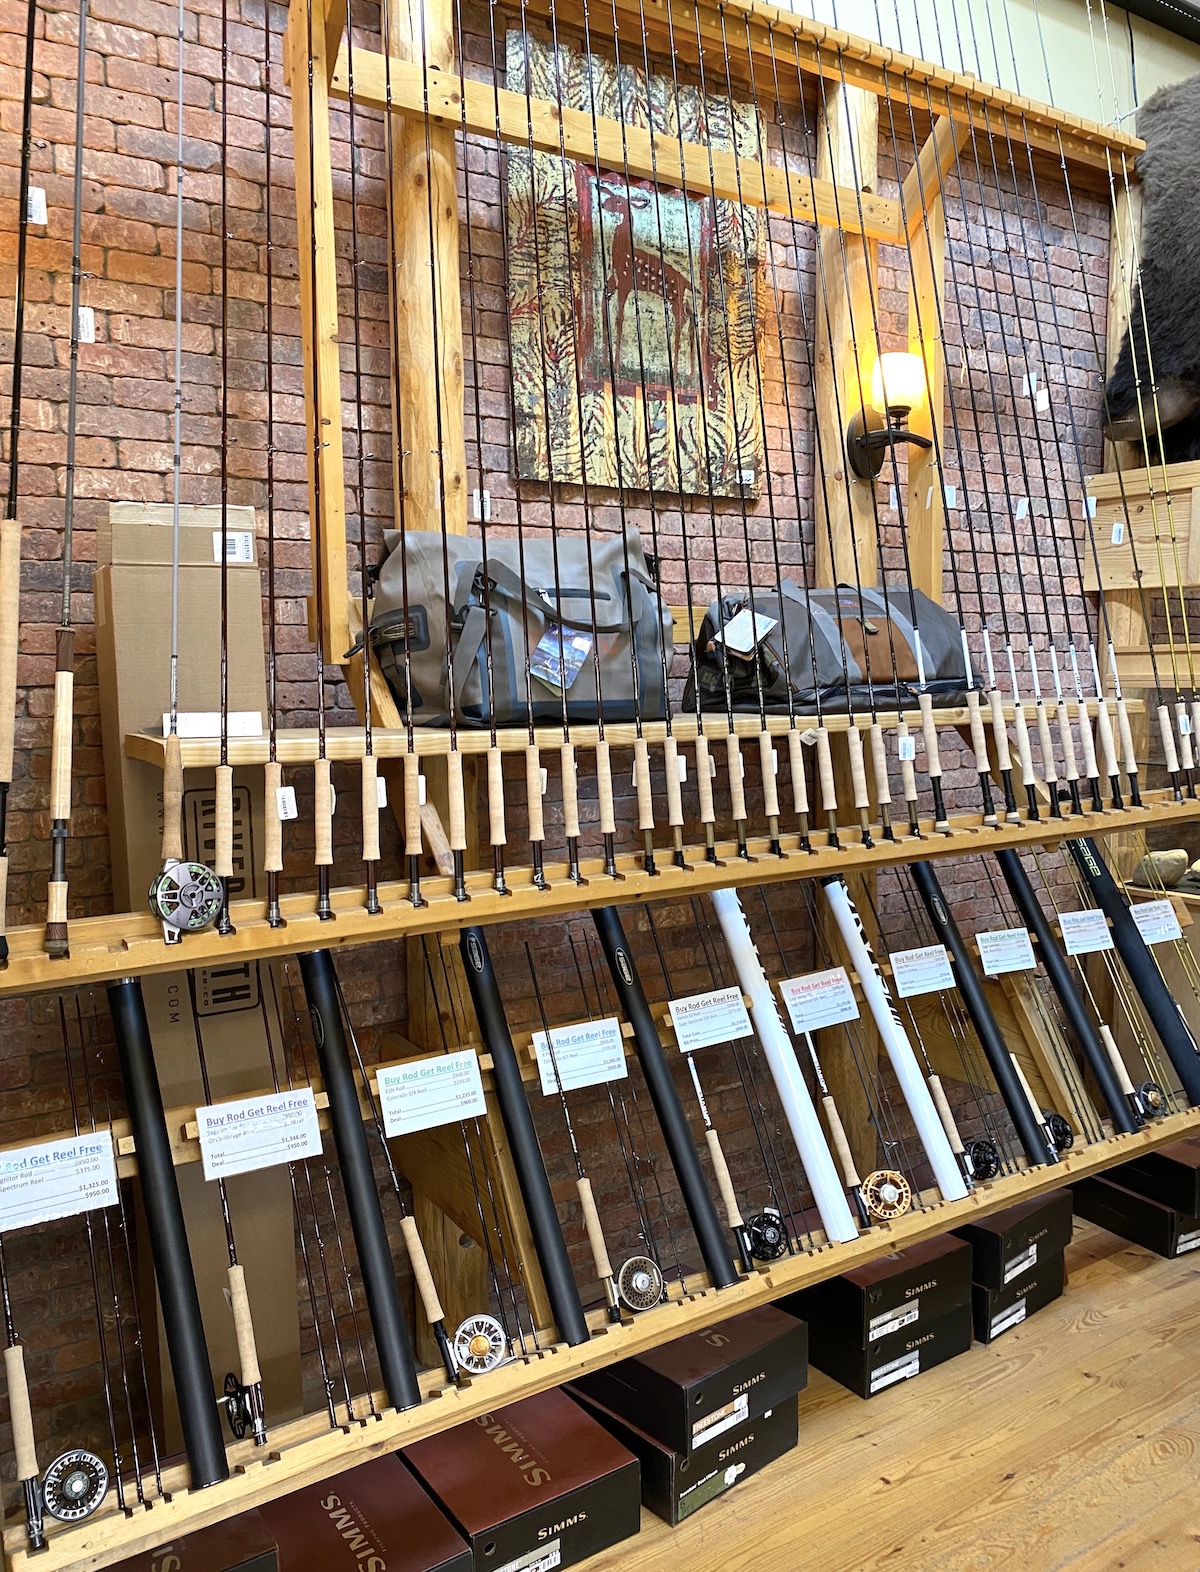 Fly rods in a standing rack at a fly rod shop